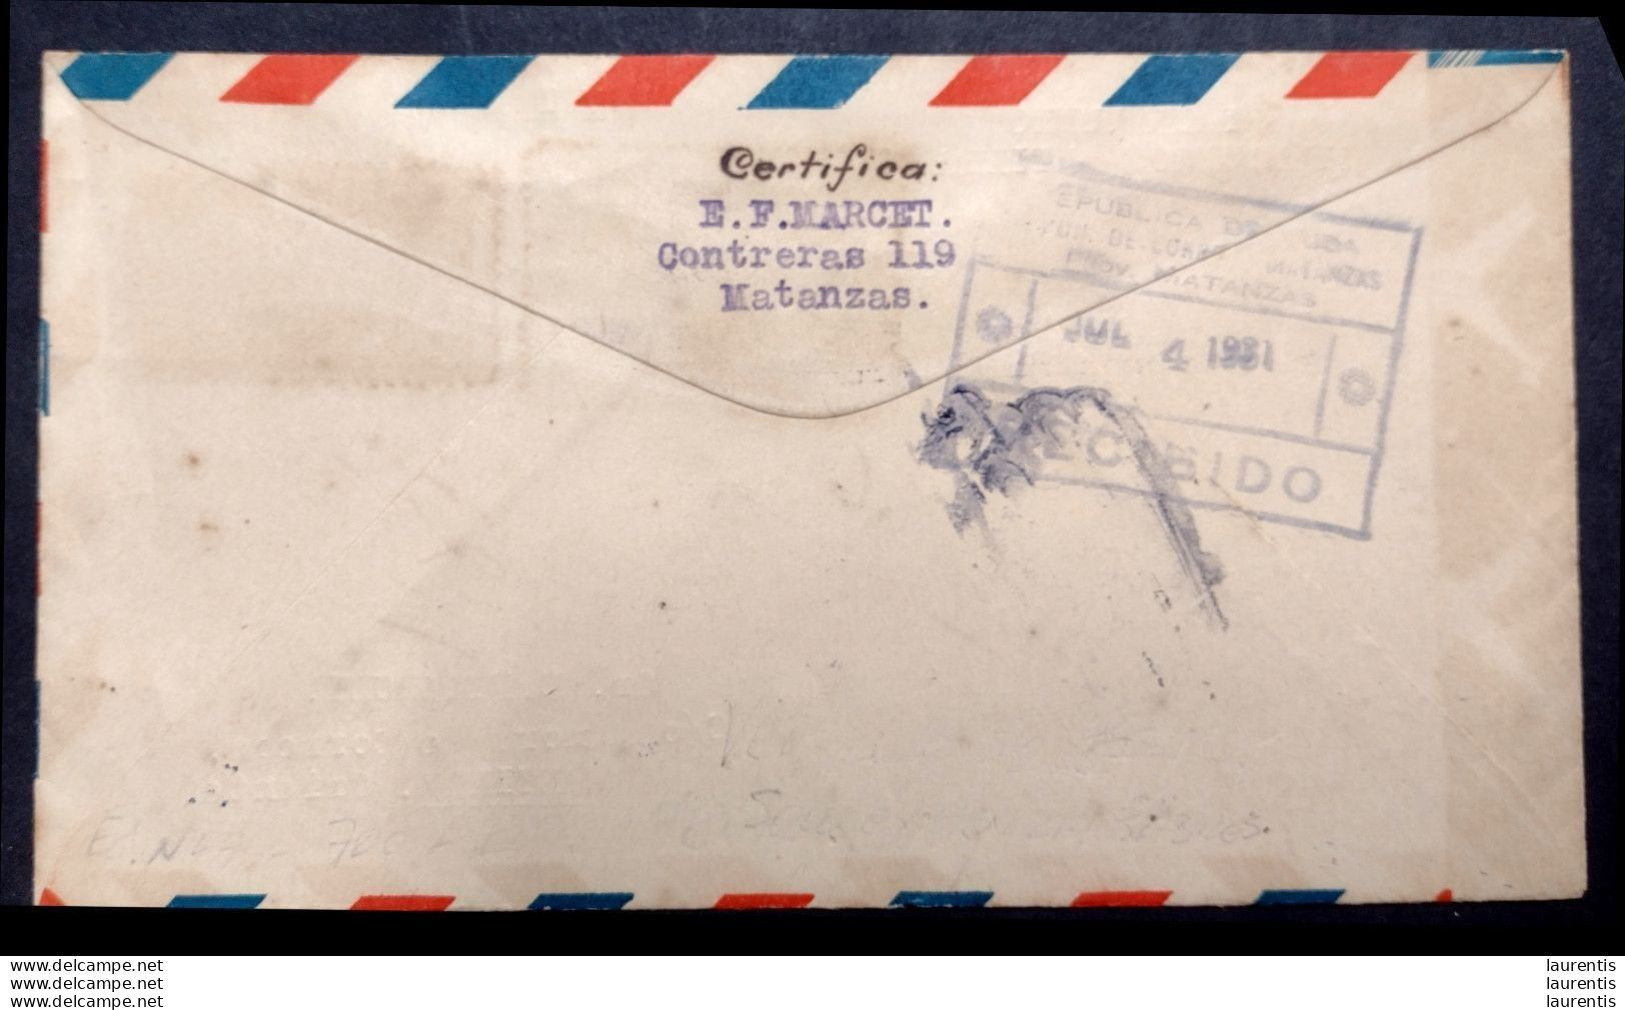 D575. First Flight Cienfuegos-Antilla - Registered On July 1st, 1931 - Only 14 Covers Are Known - 215,00 - Poste Aérienne